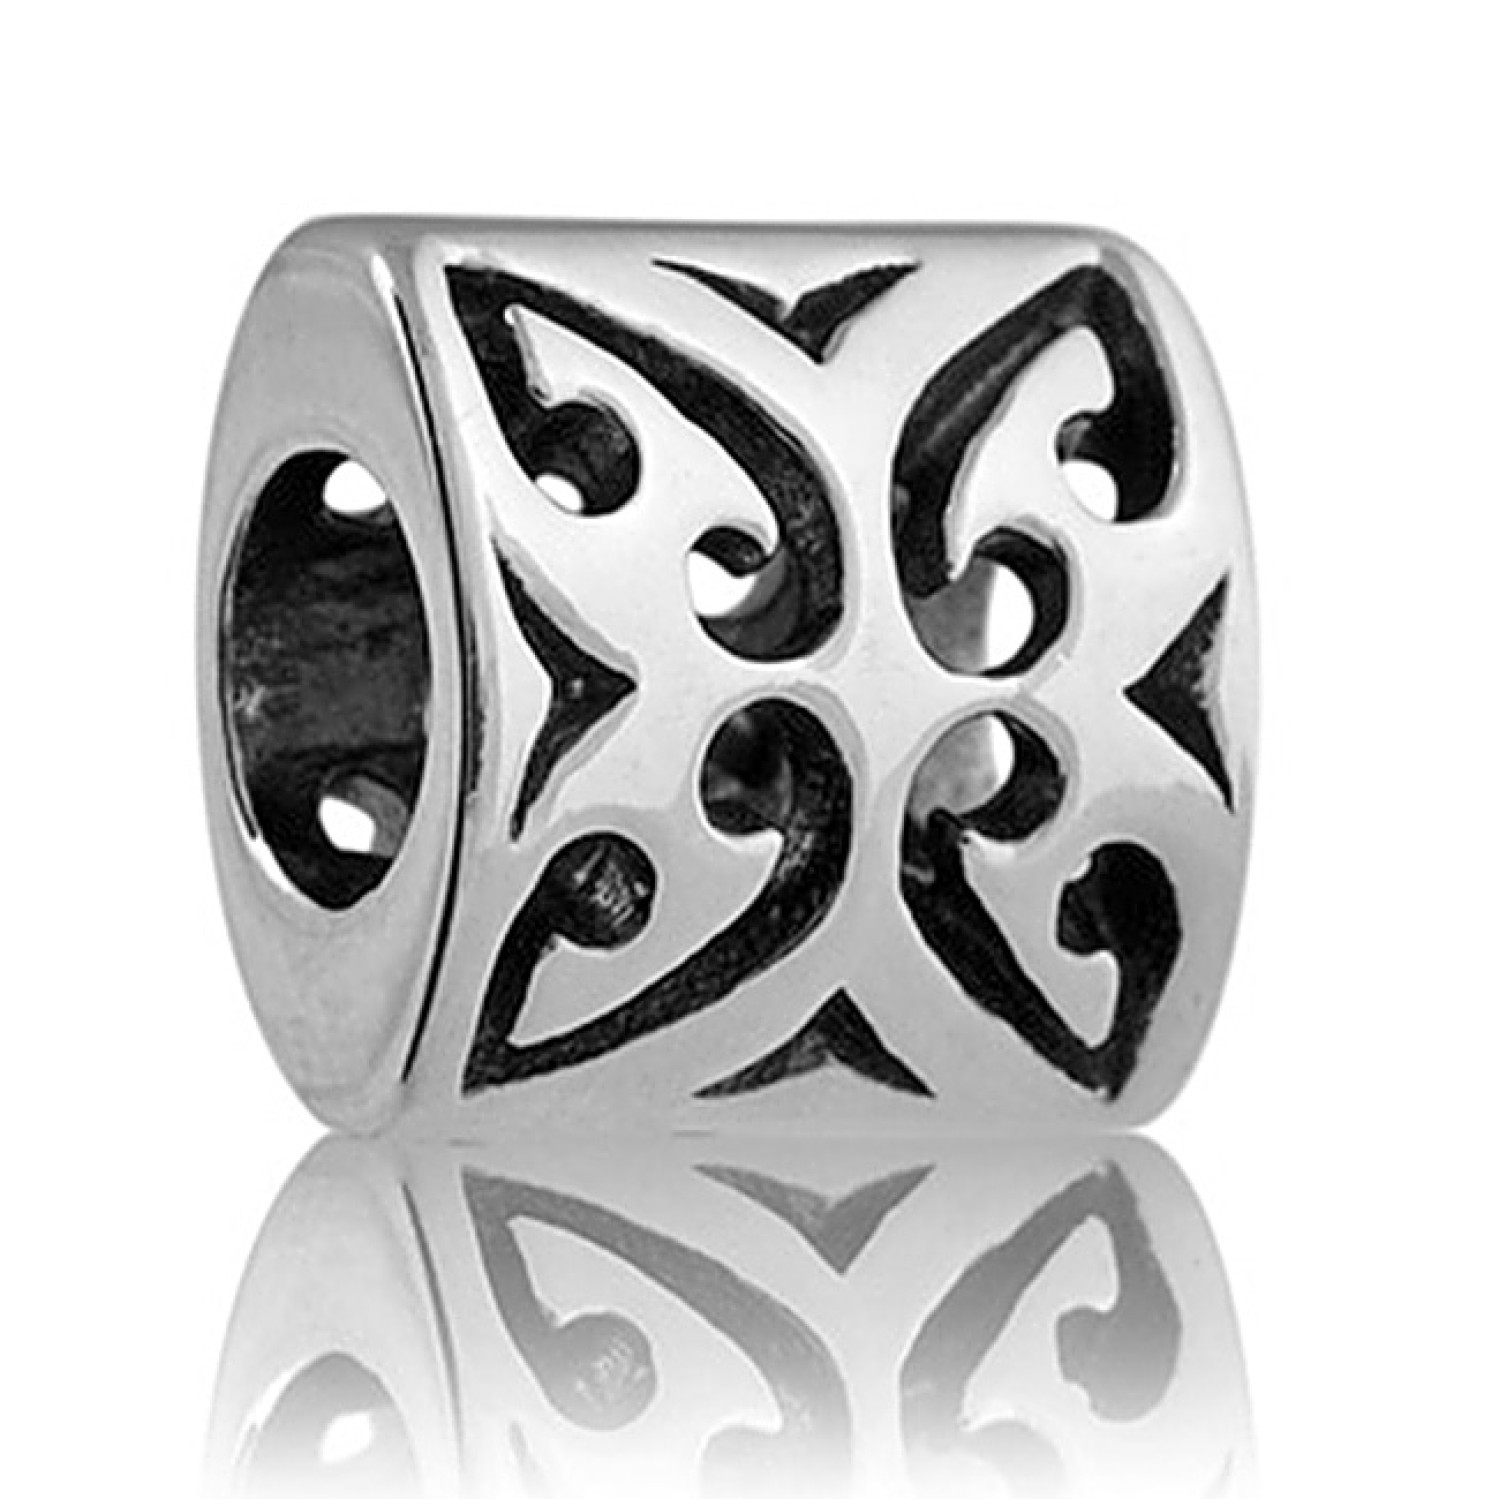 LK030 Evolve  NZ Kowhaiwhai - Beauty and Precision. Design inspiration: Beauty and Precision. Sterling Silver Christies exclusive 5 year guarantee compatible with all other major brands Bracelets But not compatible with Lovelinks Bracelets (Non Universal 